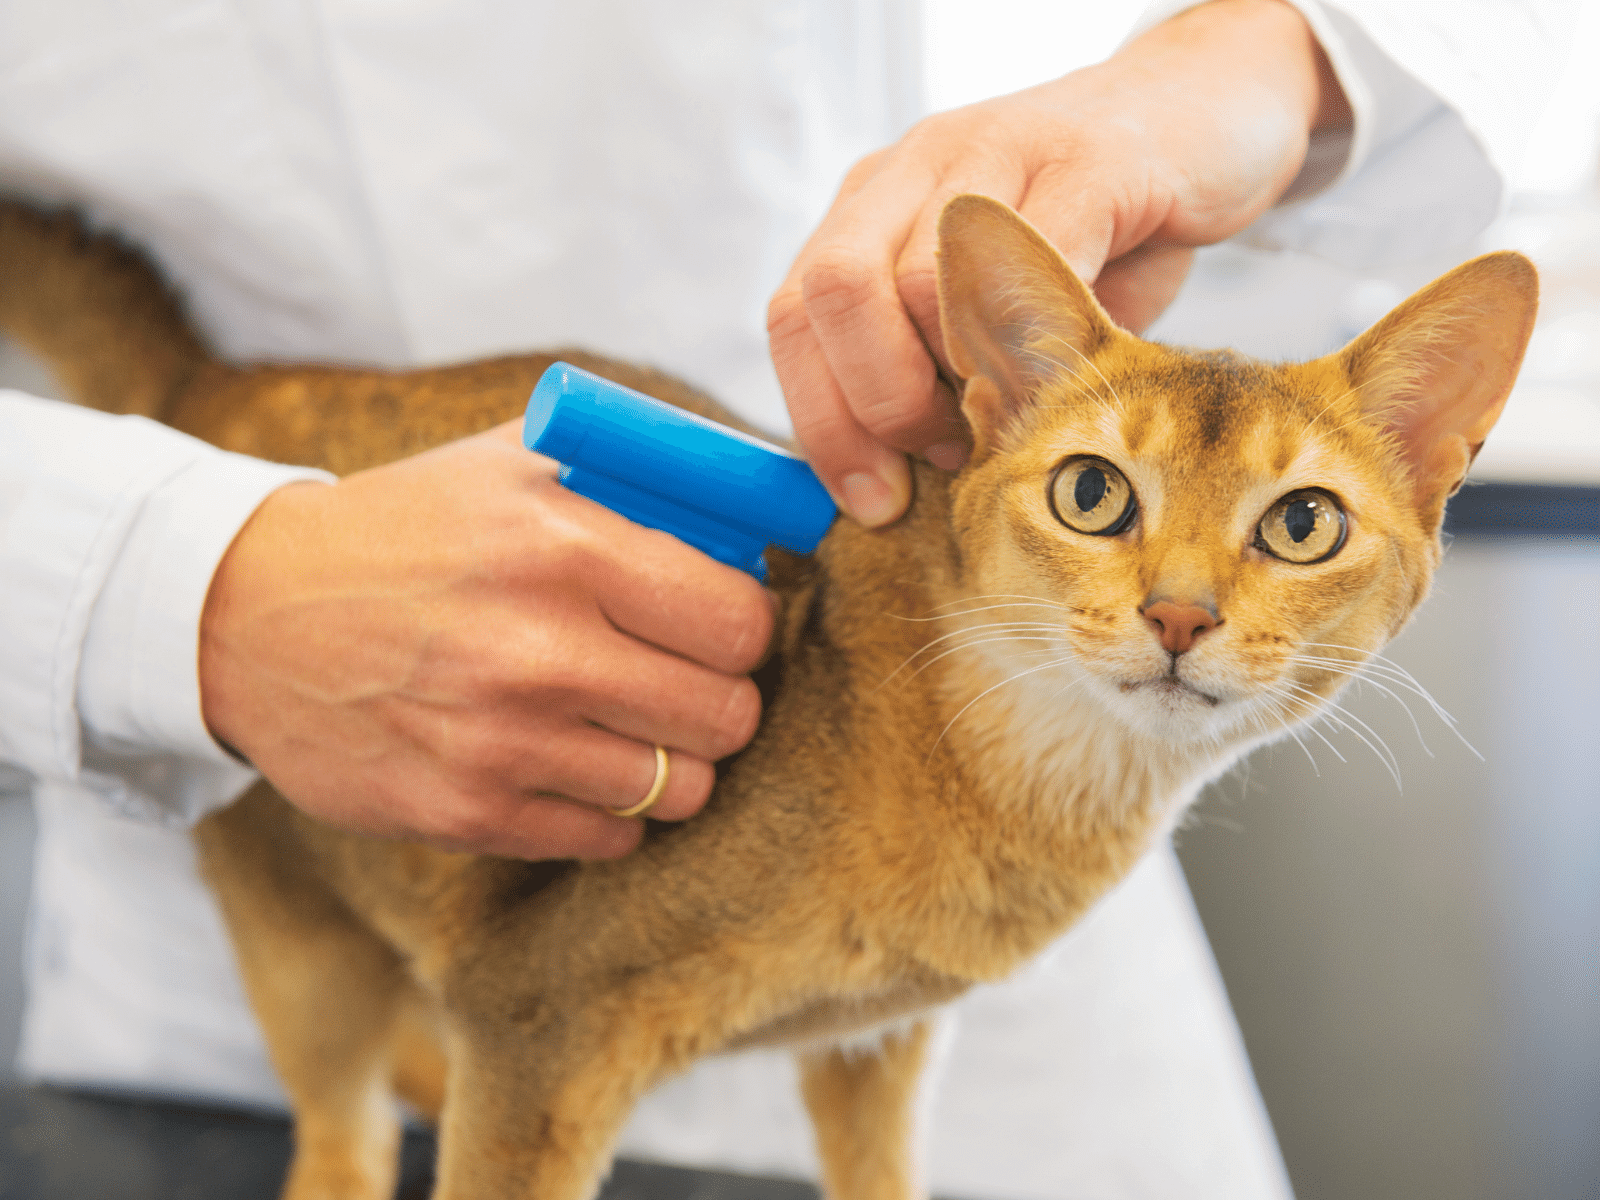 Microchip implant to cat by Vet